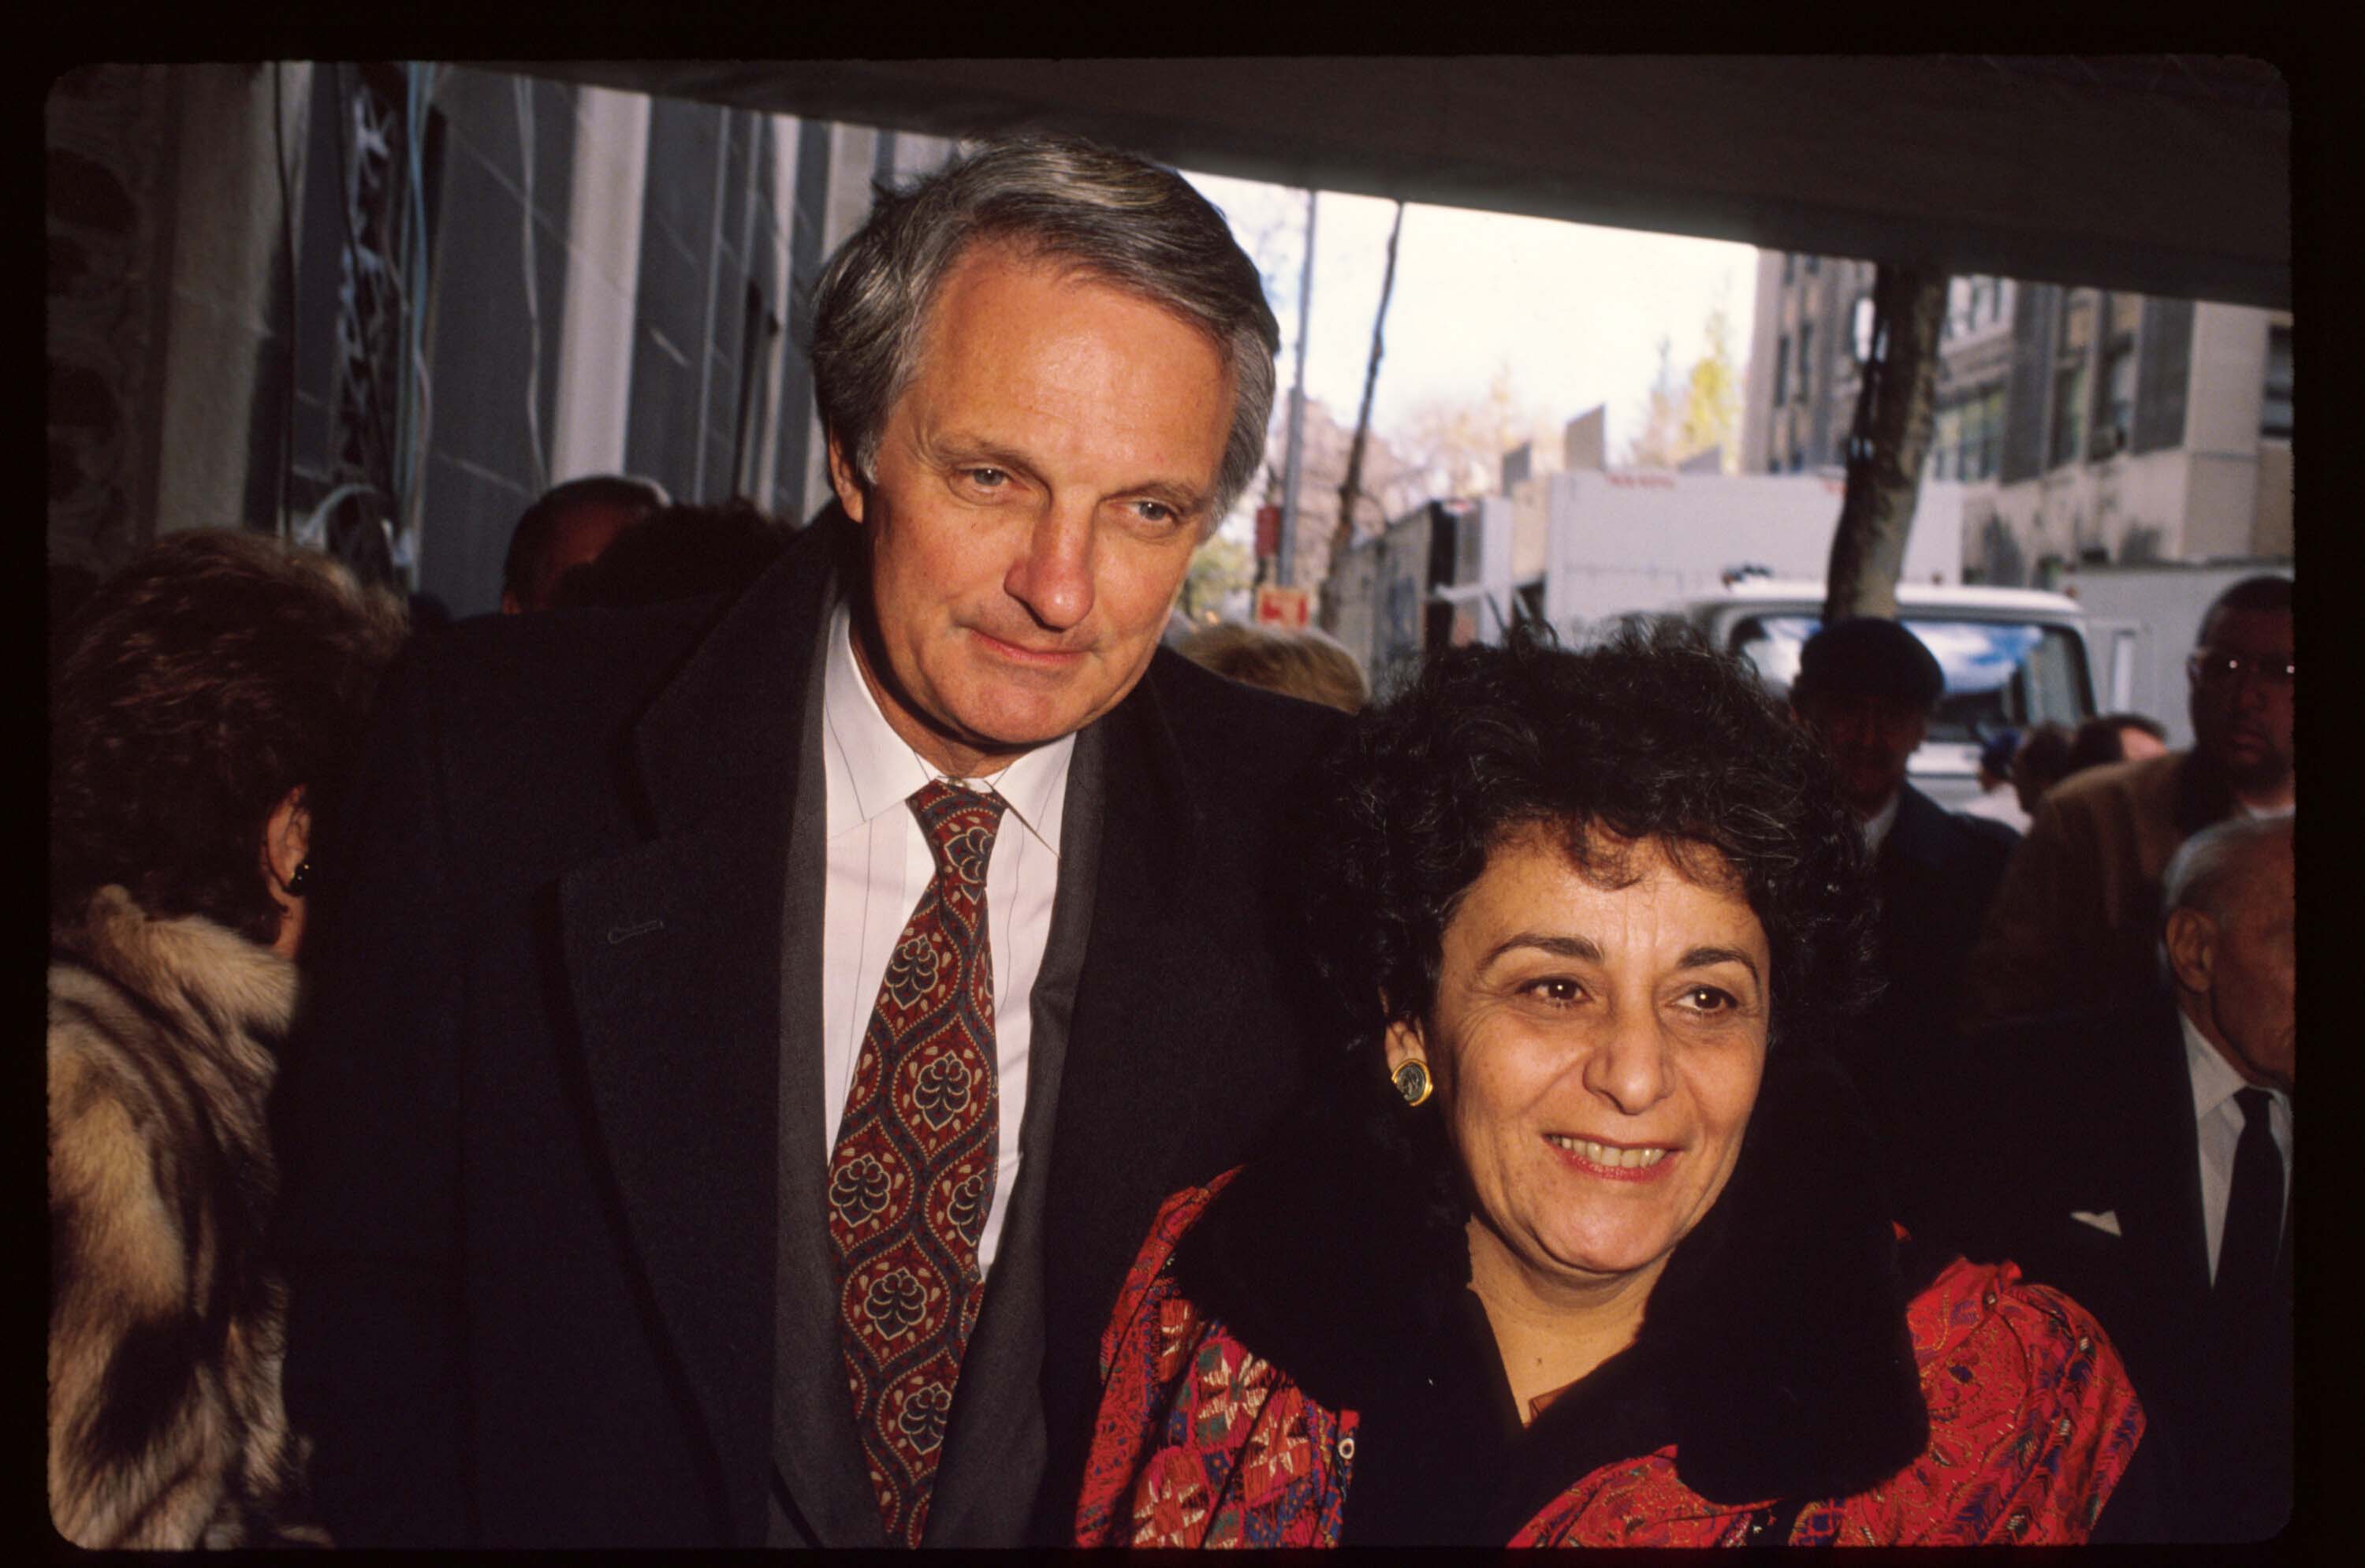 Alan Alda and Arlene Alda pictured at a memorial service for broadcasting executive William Paley, 1990, New York City. | Photo: Getty Images